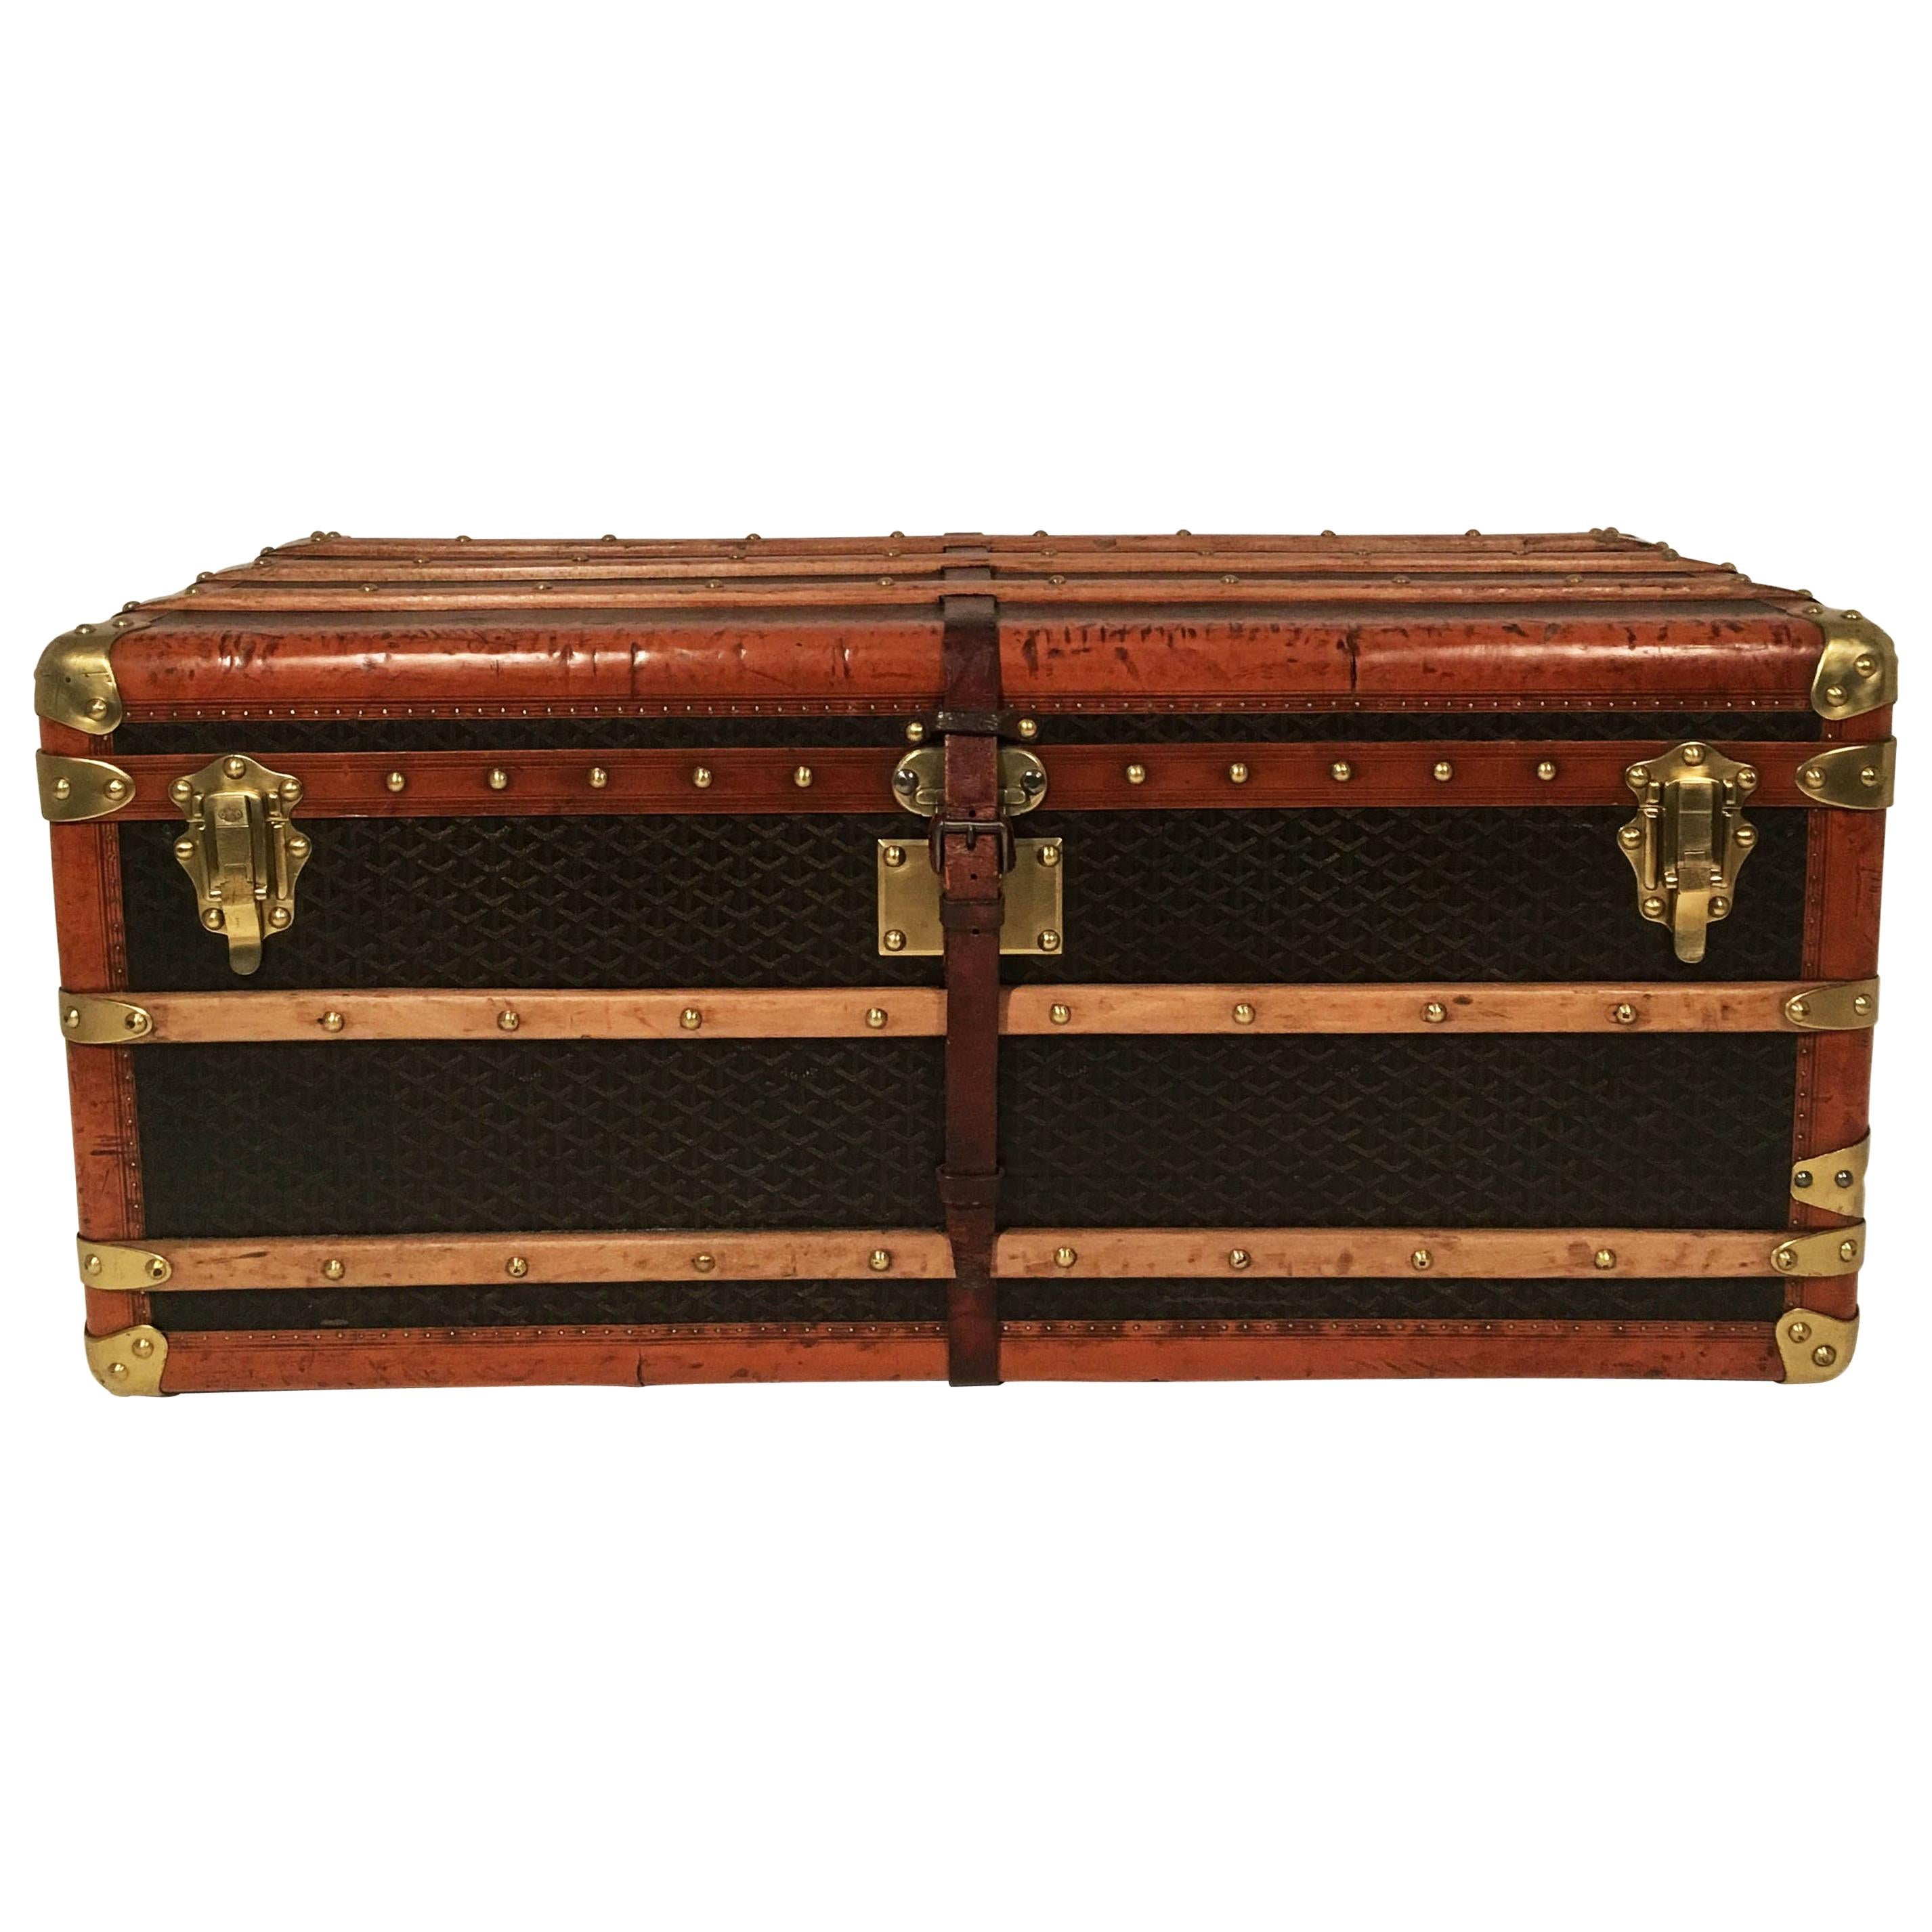 Goyard Steamer Trunk from the Princely House of Thurn and Taxis For Sale